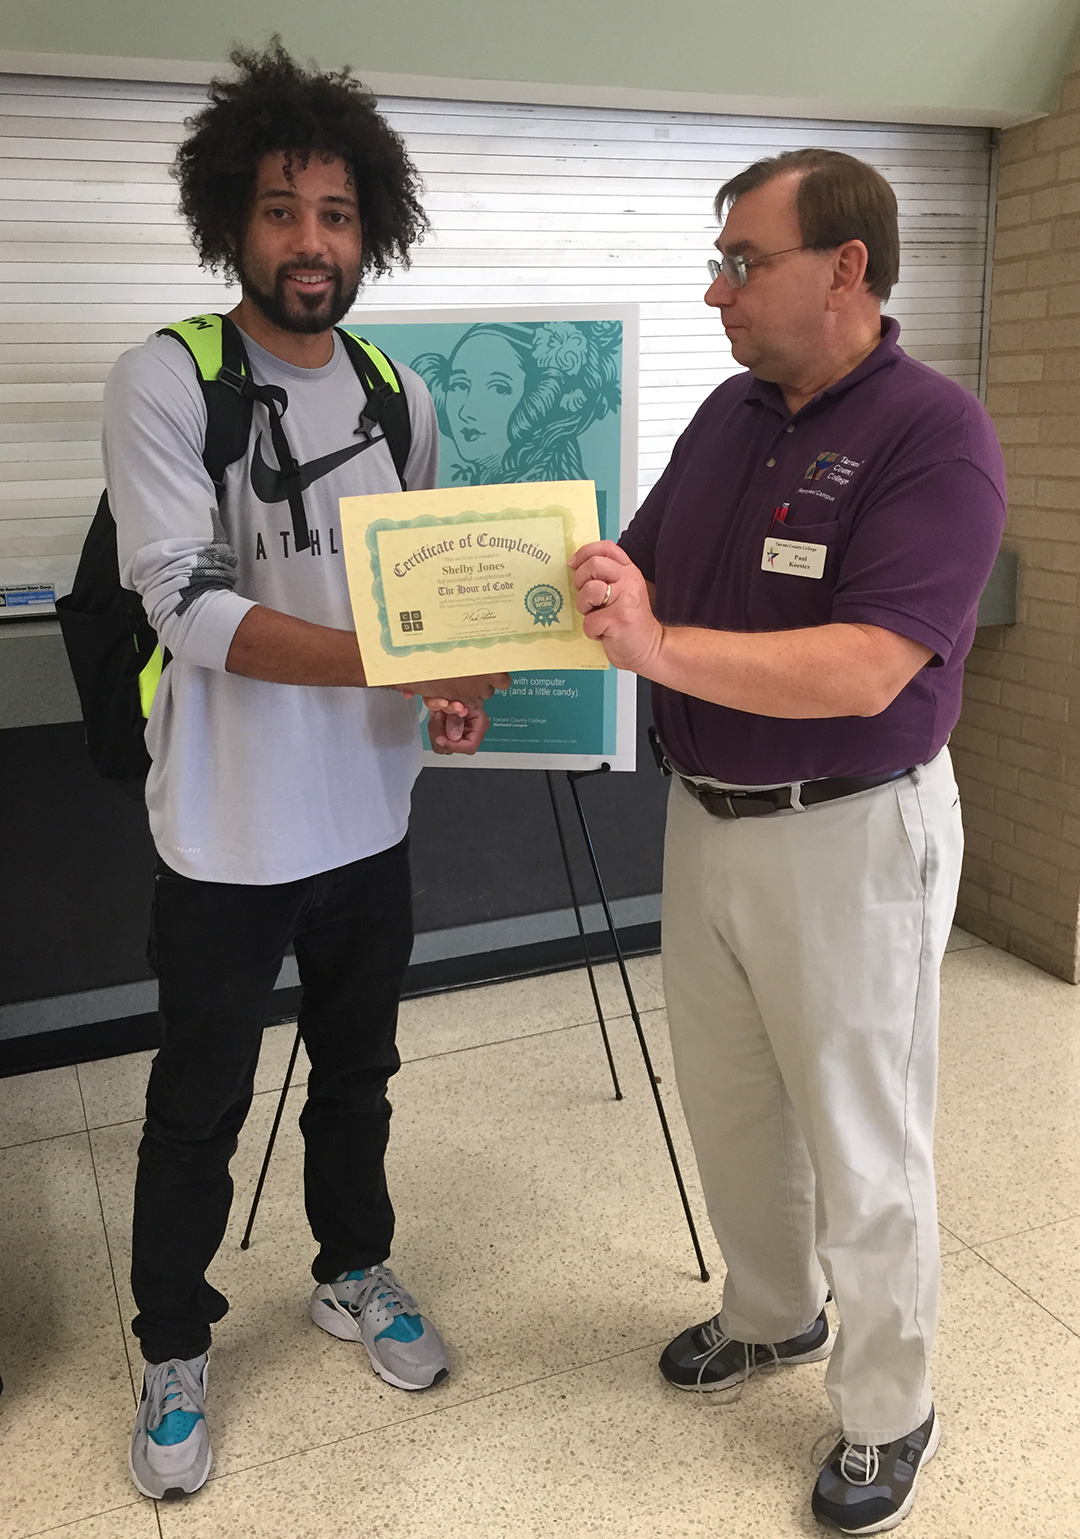 NW student Shelby Jones receives a certificate of completion from NW computer science instructor Paul Koester for successfully completing Level 3 in 2017’s Candy and Coding.